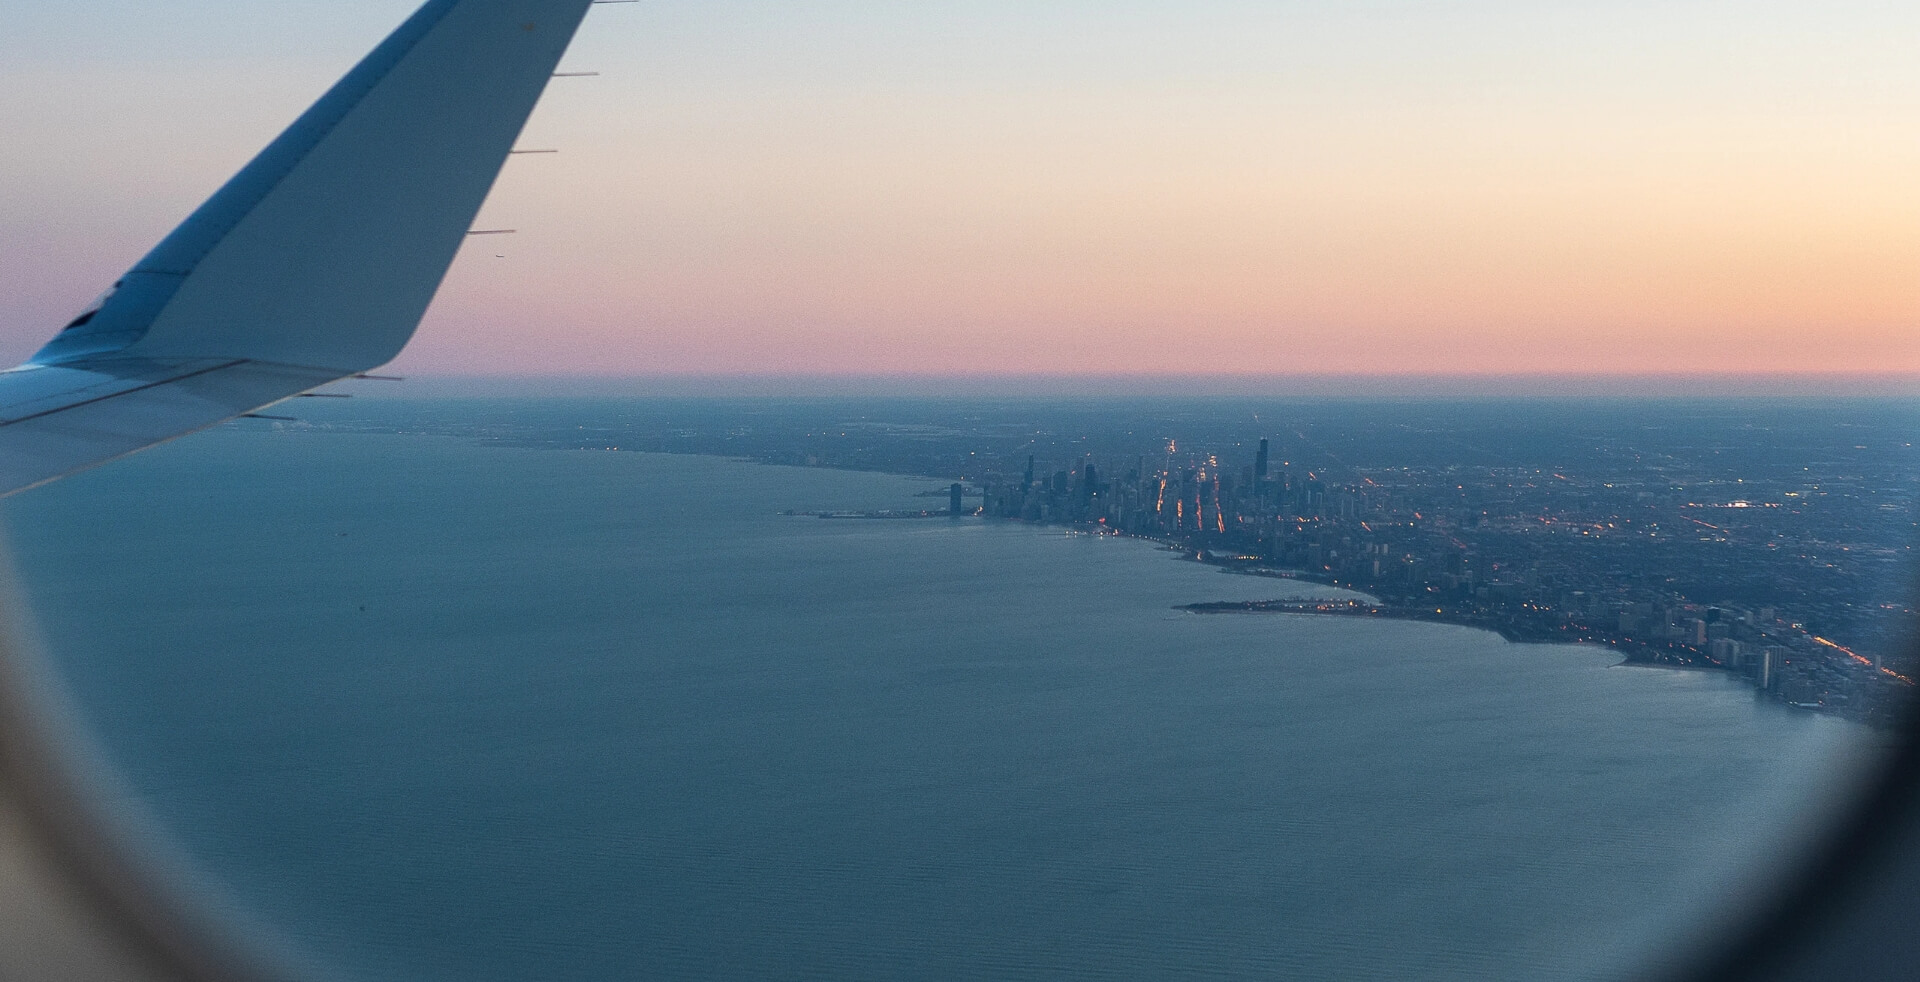 A view of Chicago and Lake Michigan at sunset from an airplane window.